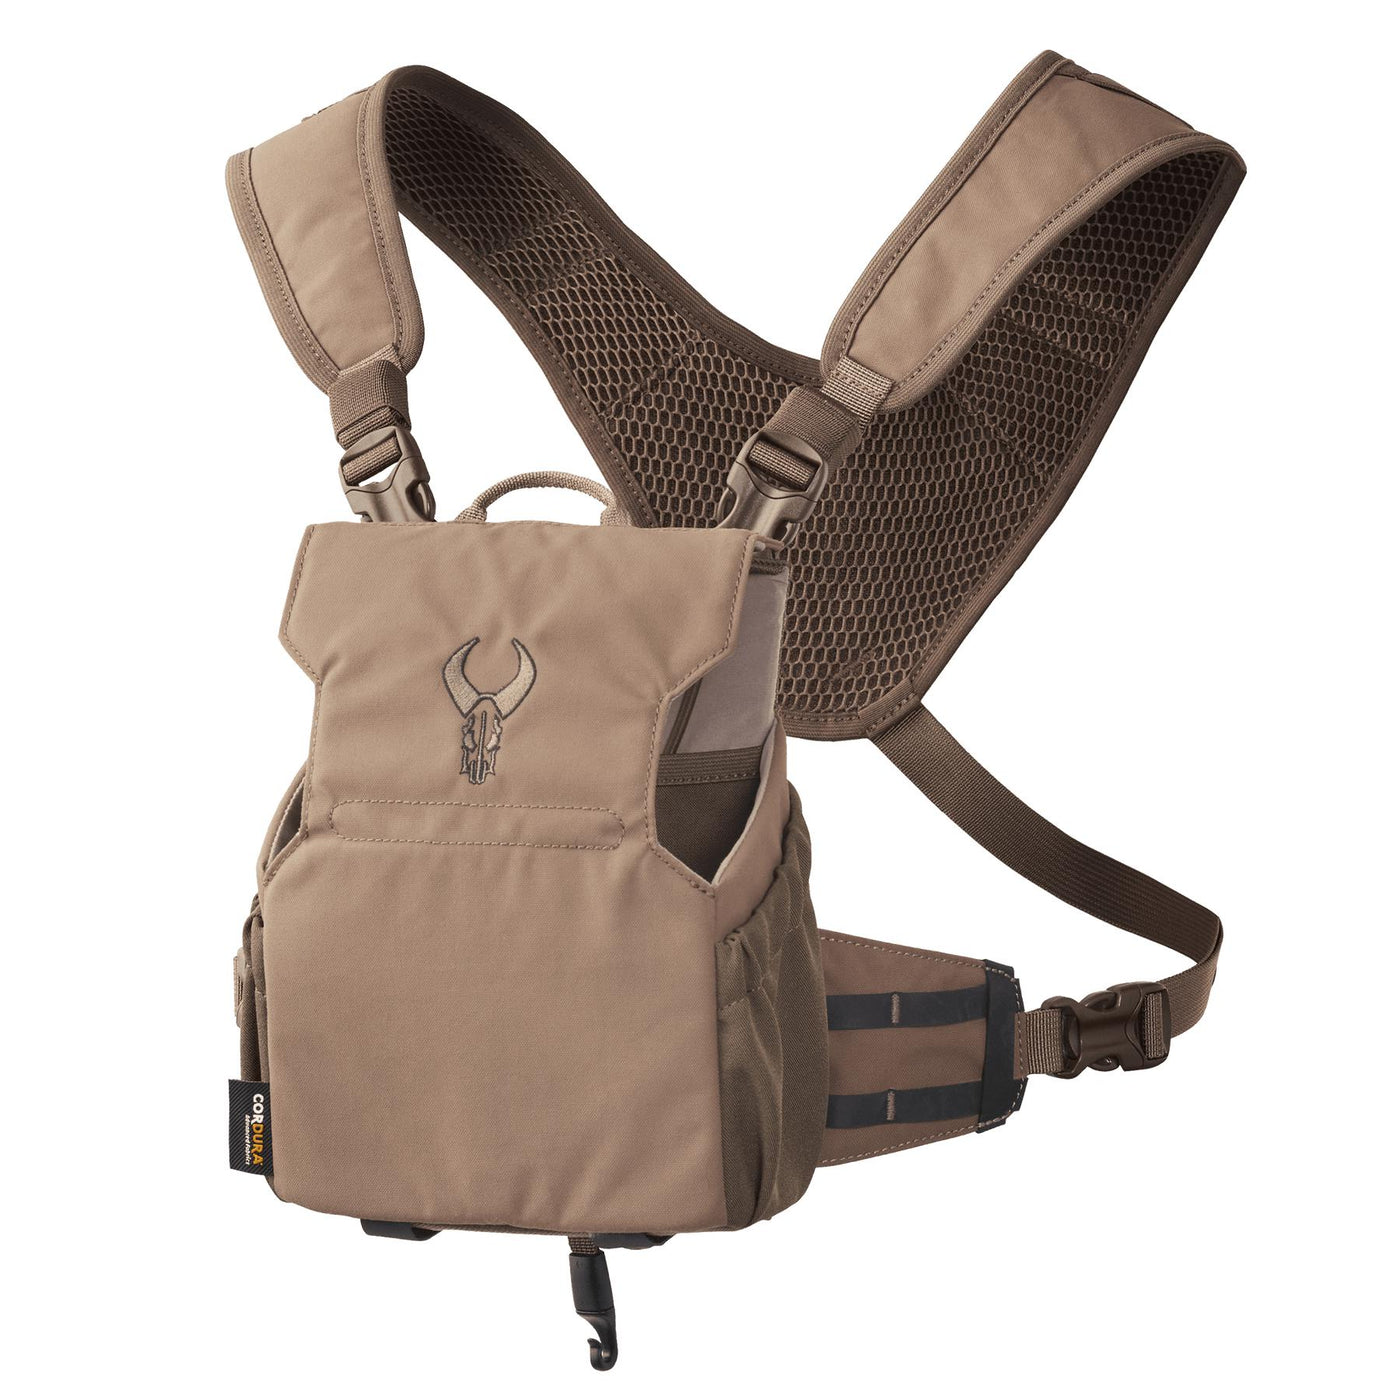 Badlands Bino Harness Axs-Hunting/Outdoors-Mud-S-Kevin's Fine Outdoor Gear & Apparel